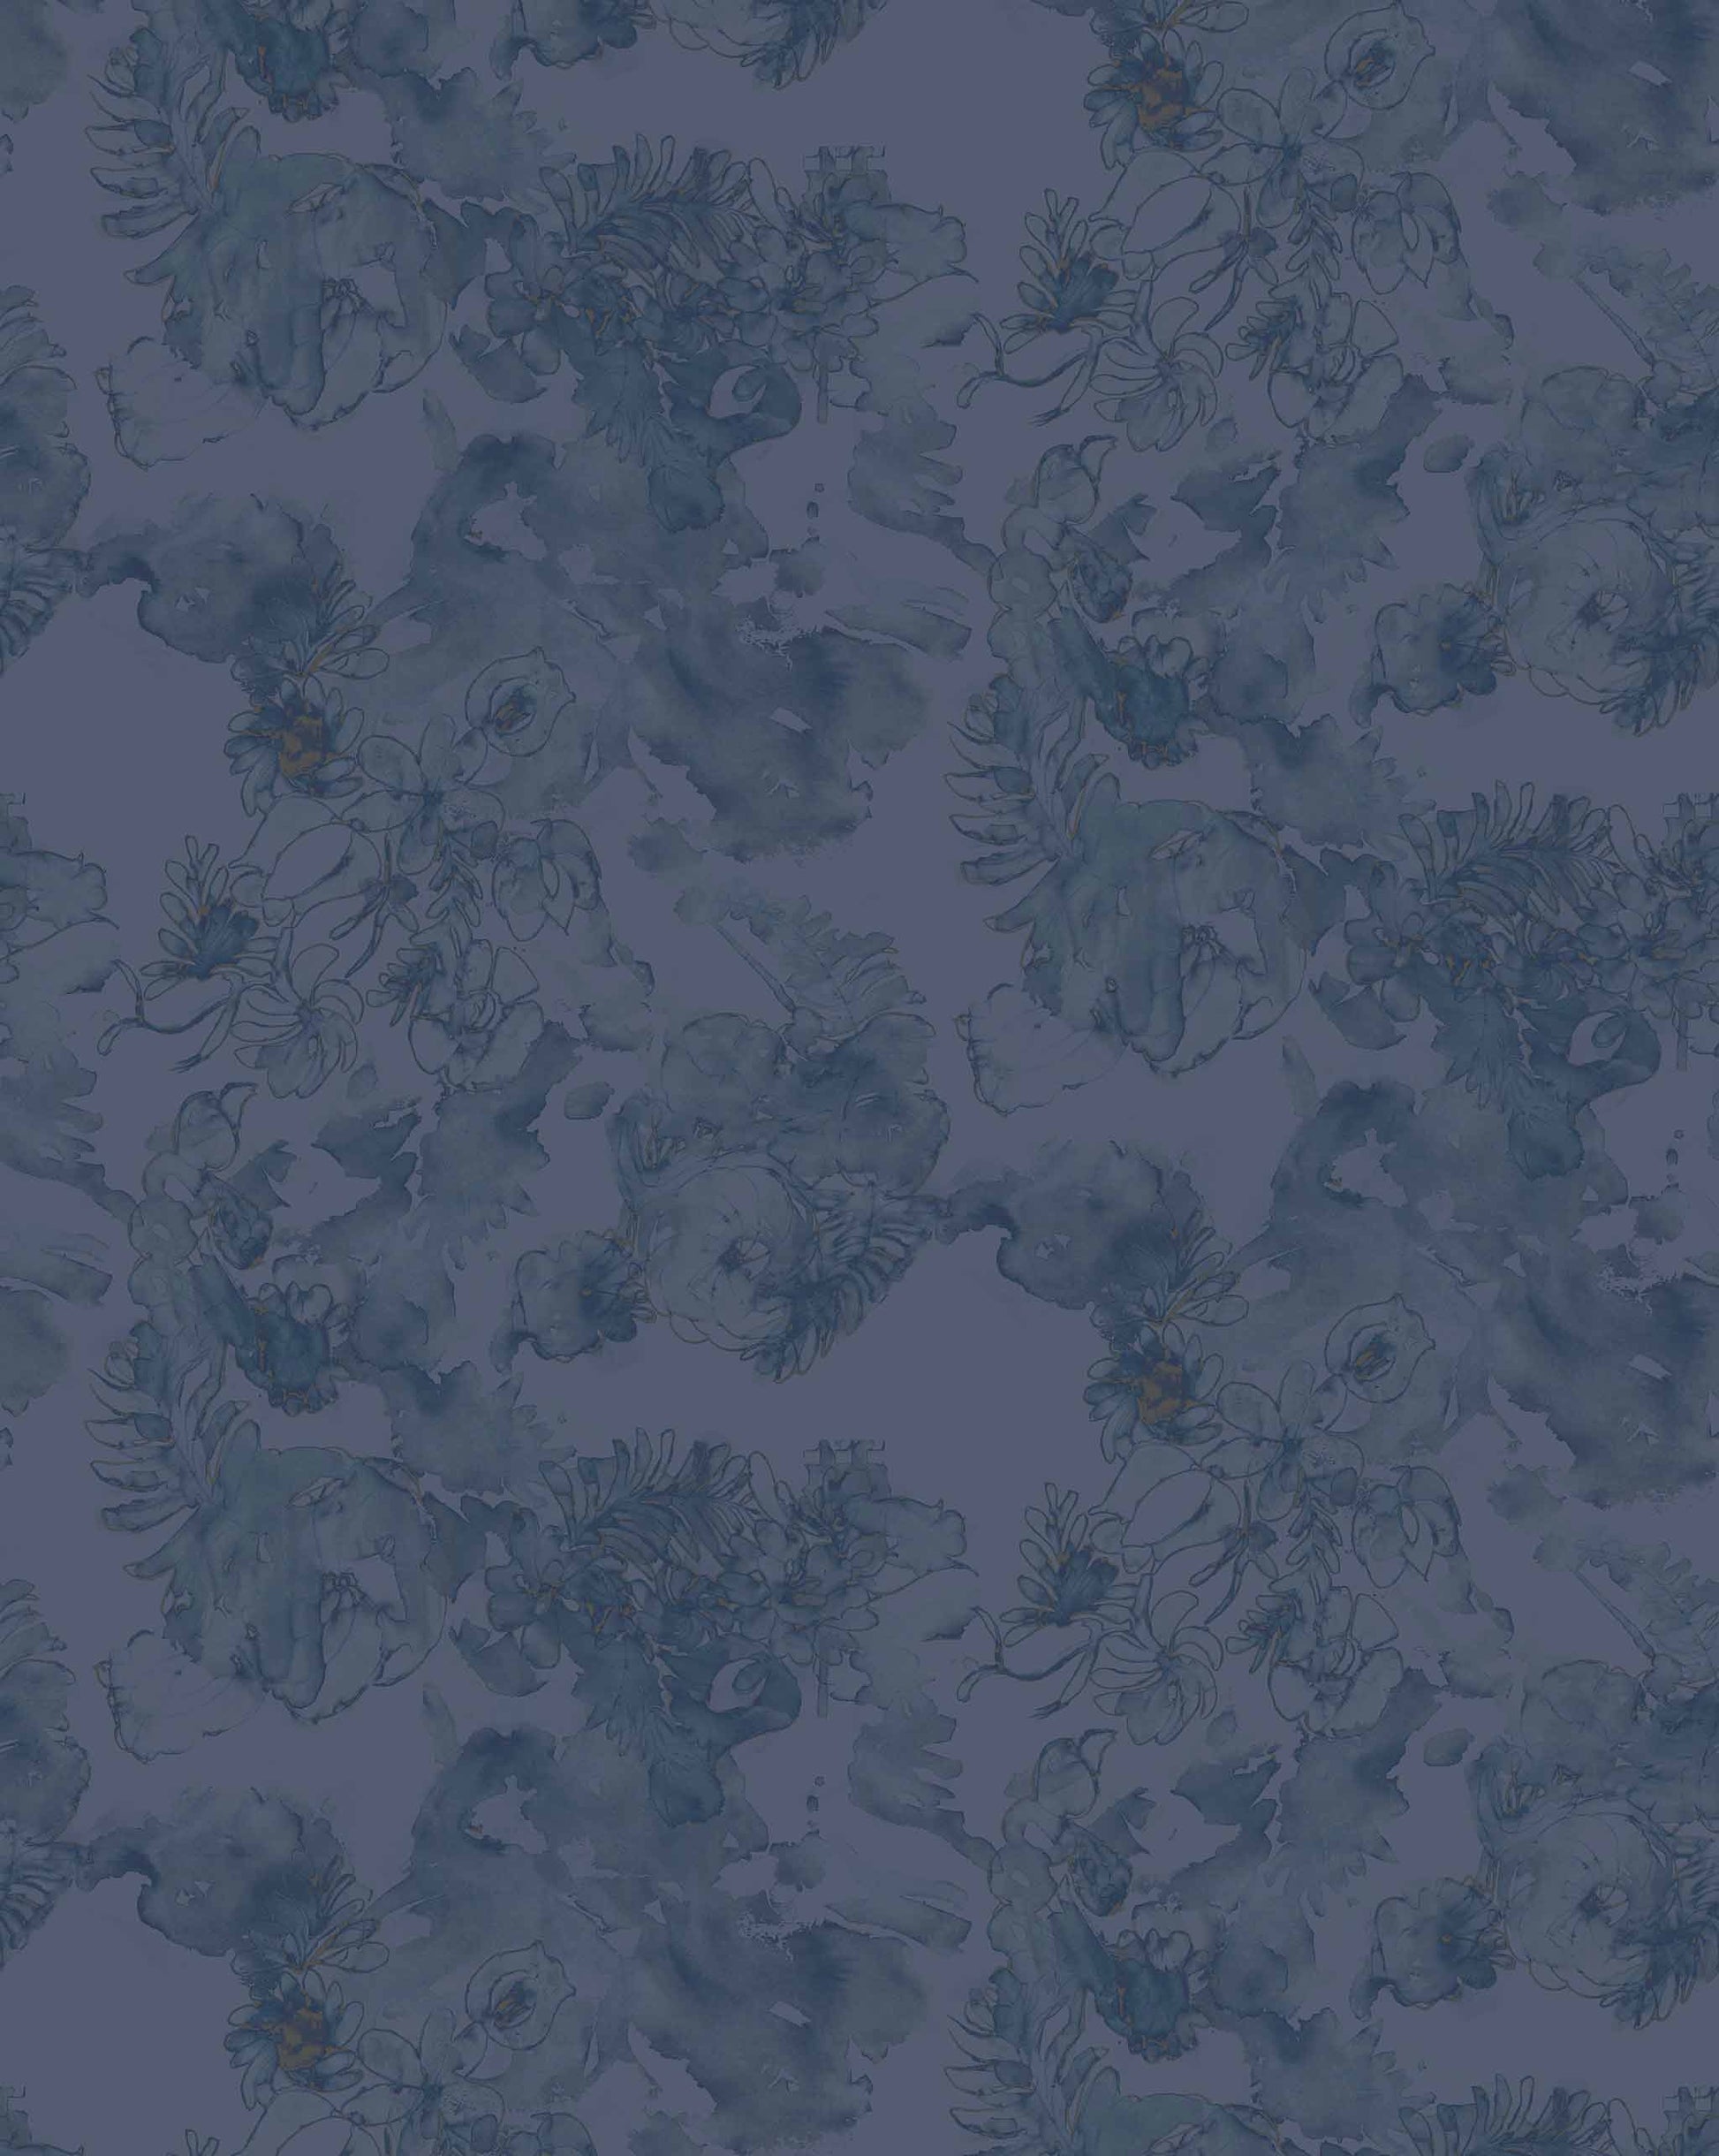 Repeating pattern of abstract, floral-like Belize Blooms Wallpaper Mural||Night Fog blots on a dark blue background, creating a textured, artistic design on luxury fabric.